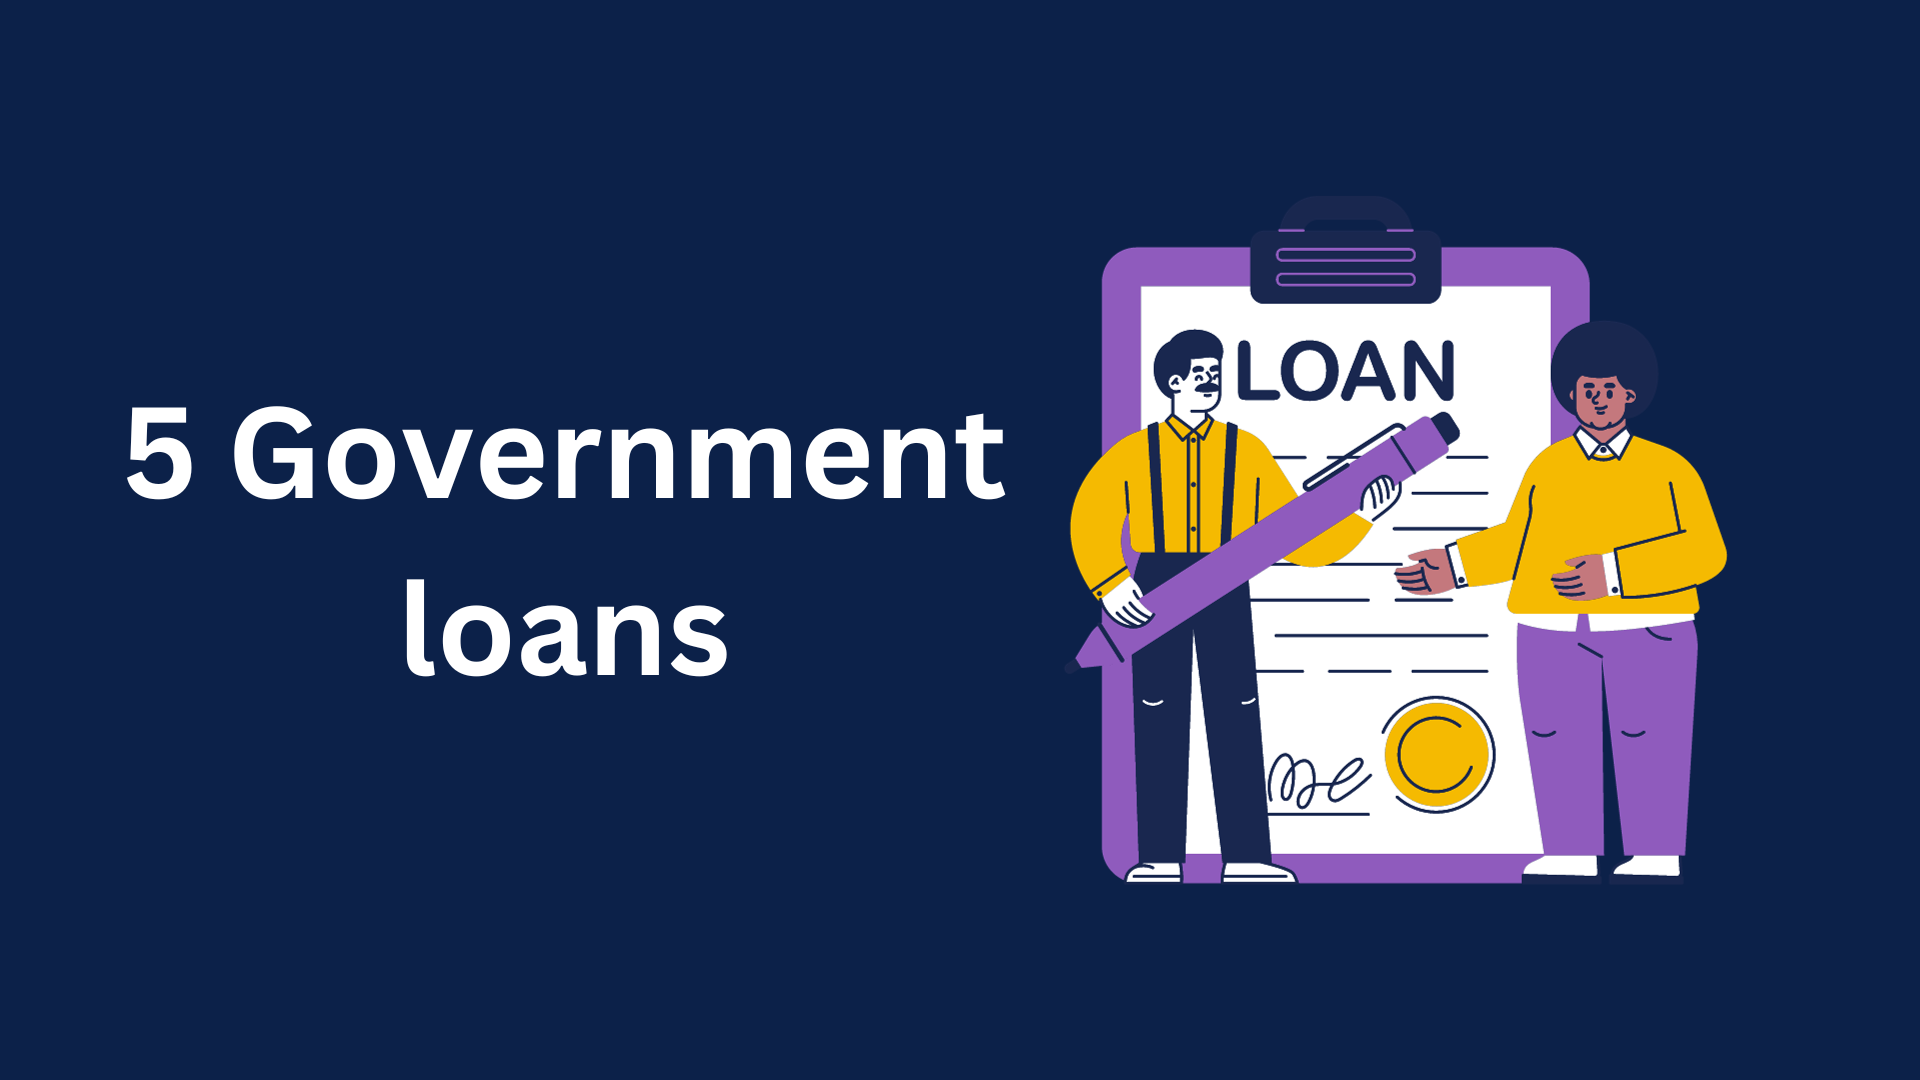 Top government business loan schemes: A comprehensive guide